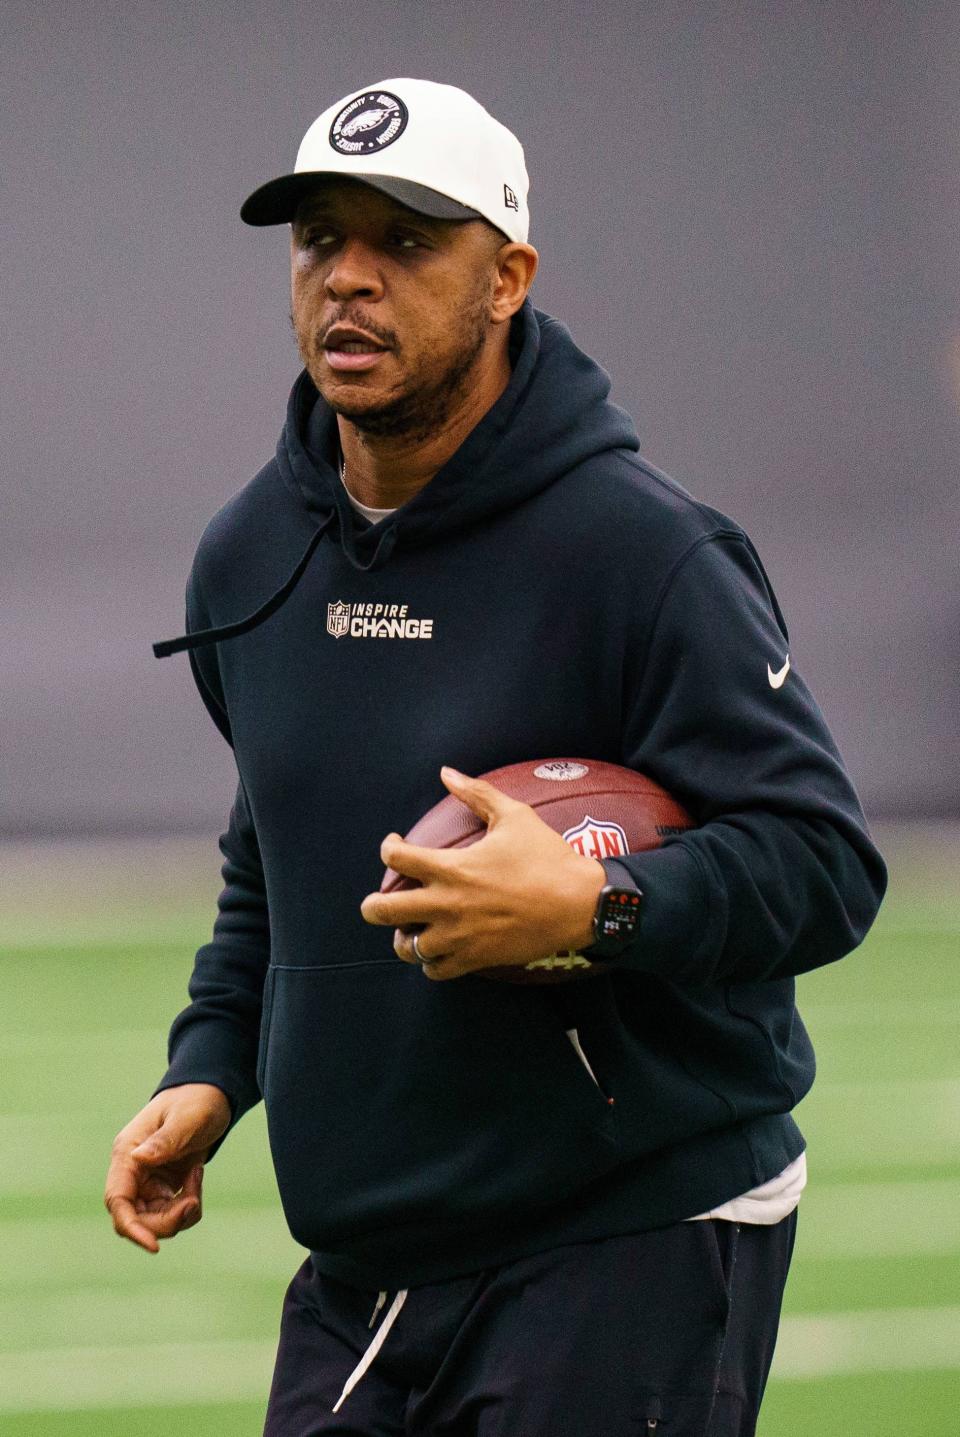 D.K. McDonald looks on while coaching as an assistant defensive backs coach with the Philadelphia Eagles in the NFL on Jan. 26, 2023, in Philadelphia.